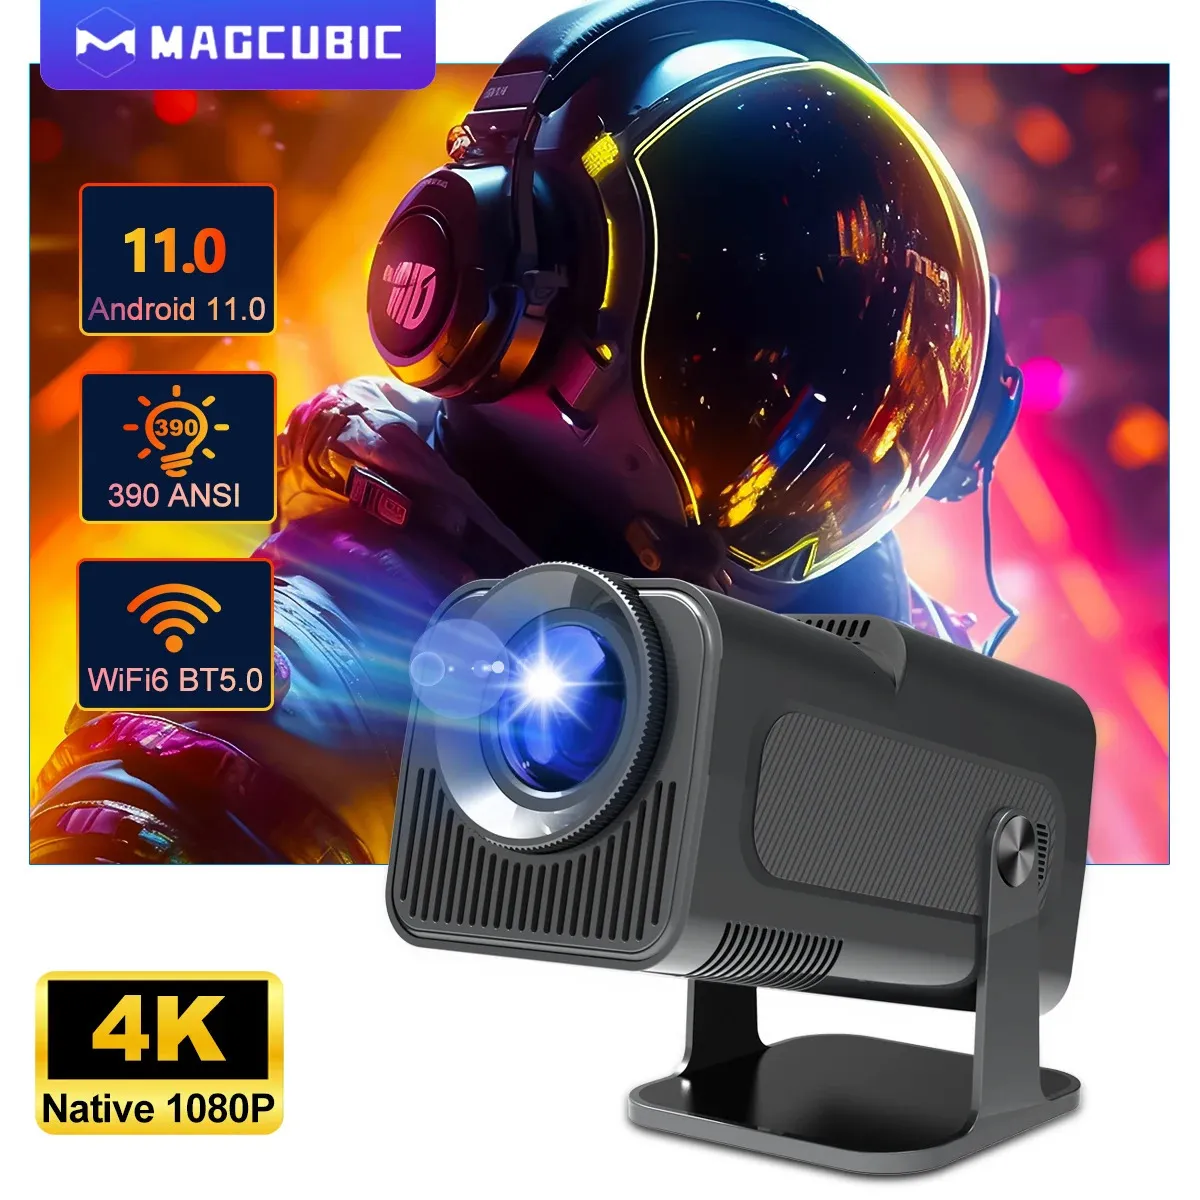 Magcubic 4K Android 11 Projector Native 1080P 390ANSI HY320 Dual Wifi6 BT5.0 1920*1080P Cinema portable Projetor upgrated HY300 240112